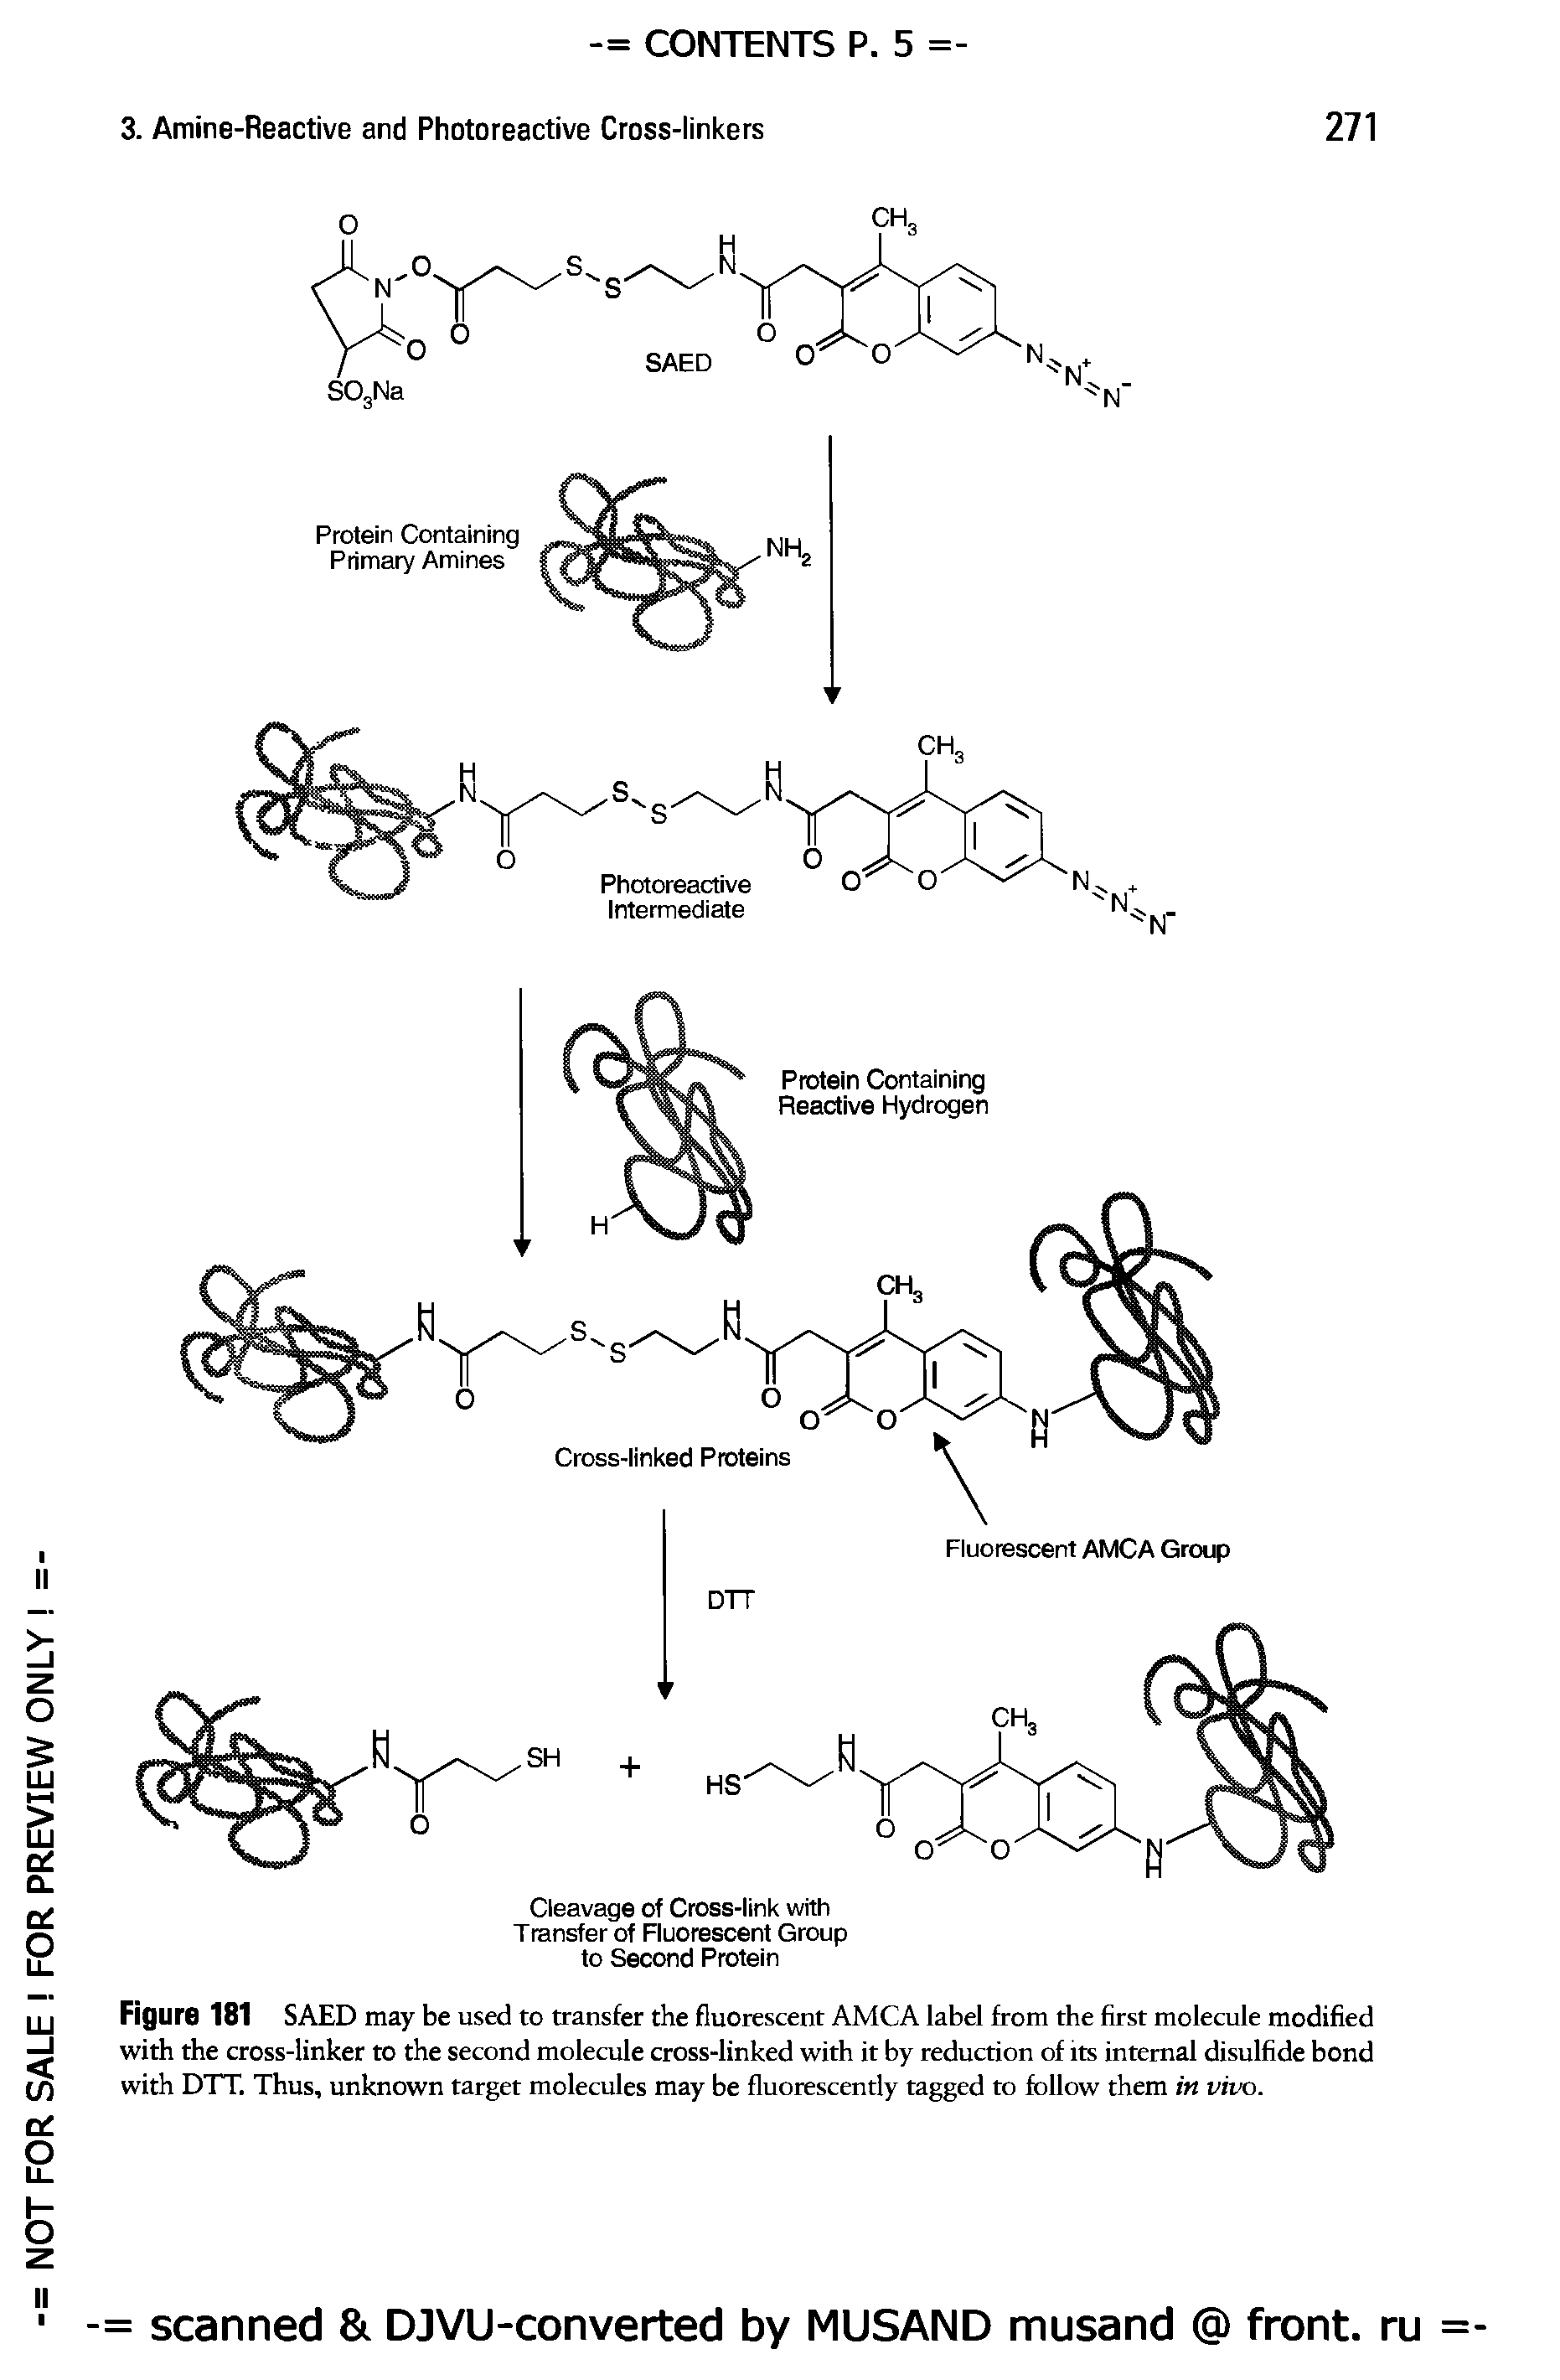 Figure 181 SAED may be used to transfer the fluorescent AMCA label from the first molecule modified with the cross-linker to the second molecule cross-linked with it by reduction of its internal disulfide bond with DTT. Thus, unknown target molecules may be fluorescently tagged to follow them in vivo.